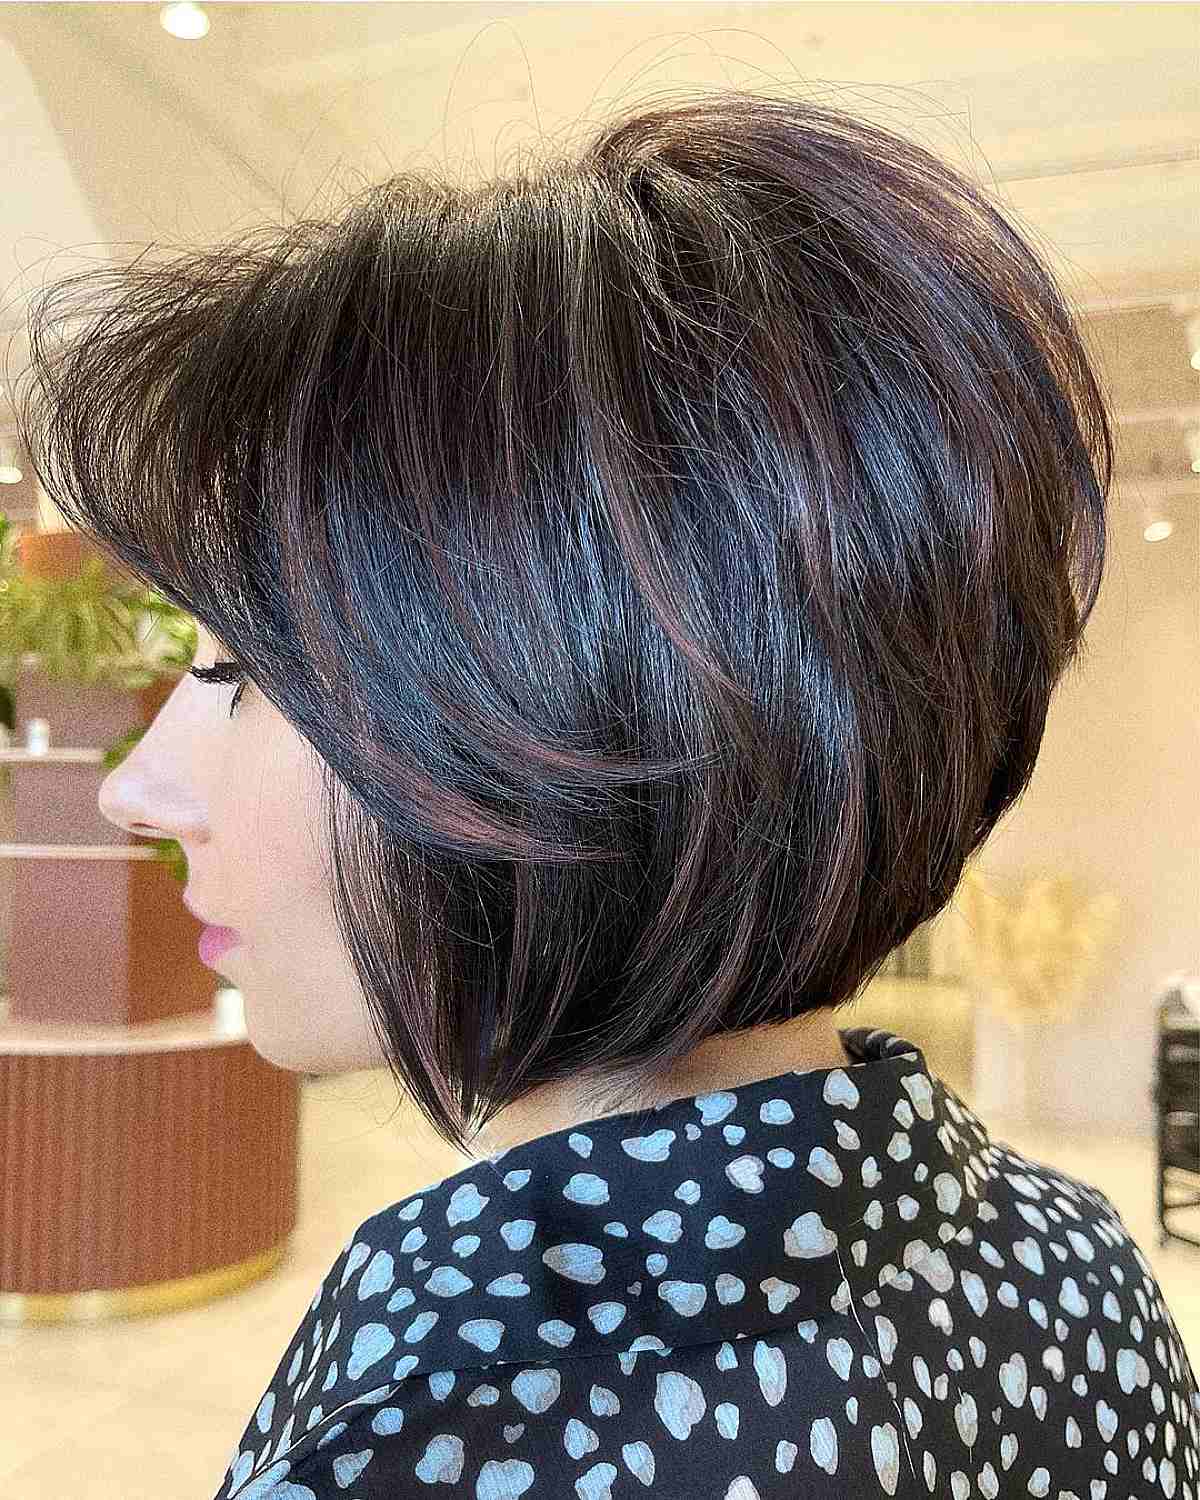 Inverted and Stacked Bobs with Bangs